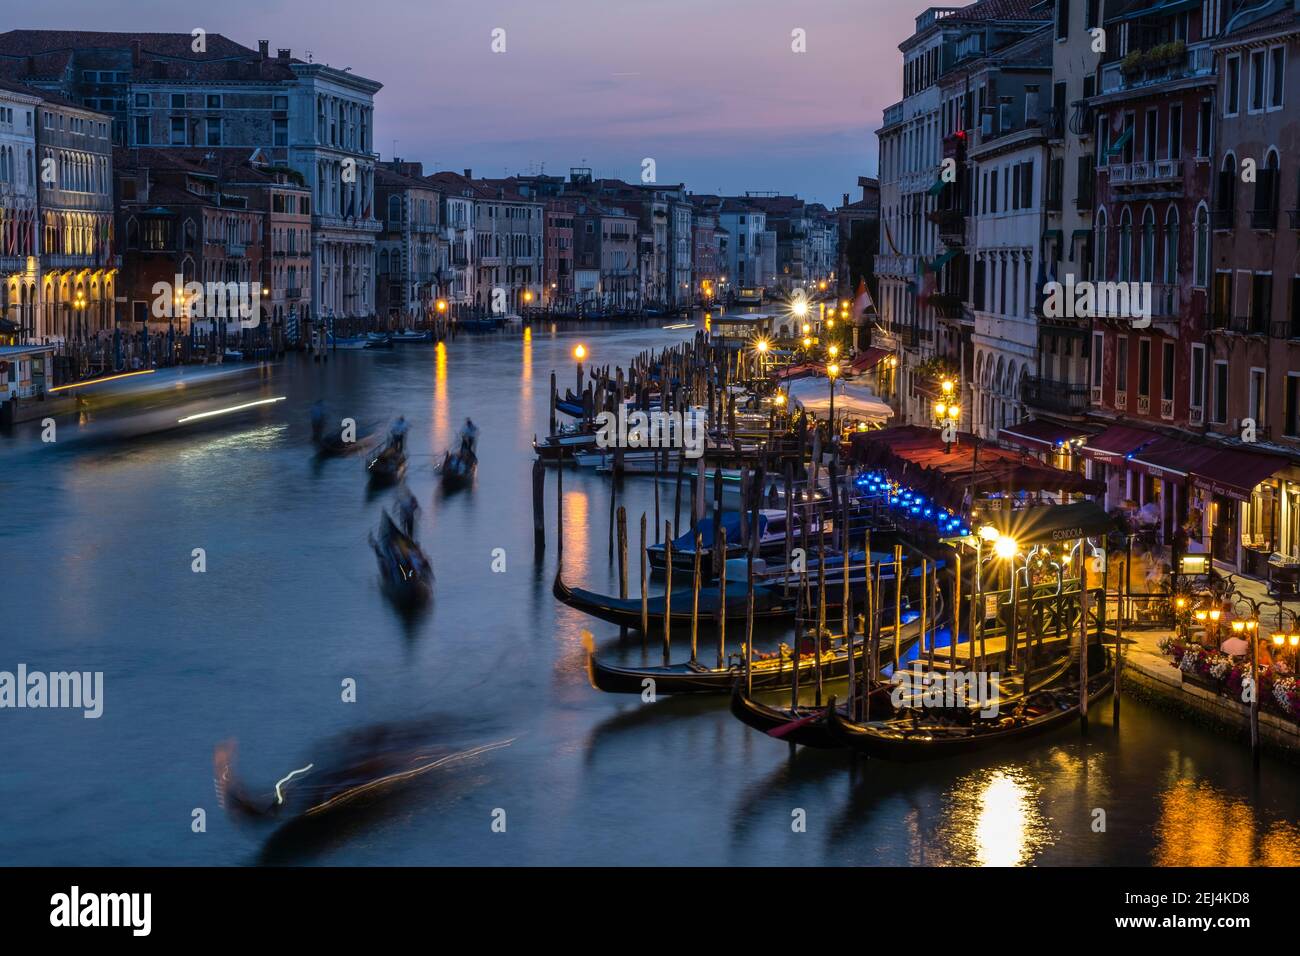 Evening atmosphere at the Rialto Bridge on the Grand Canal, San Marco district, Venice, Veneto region, Italy Stock Photo